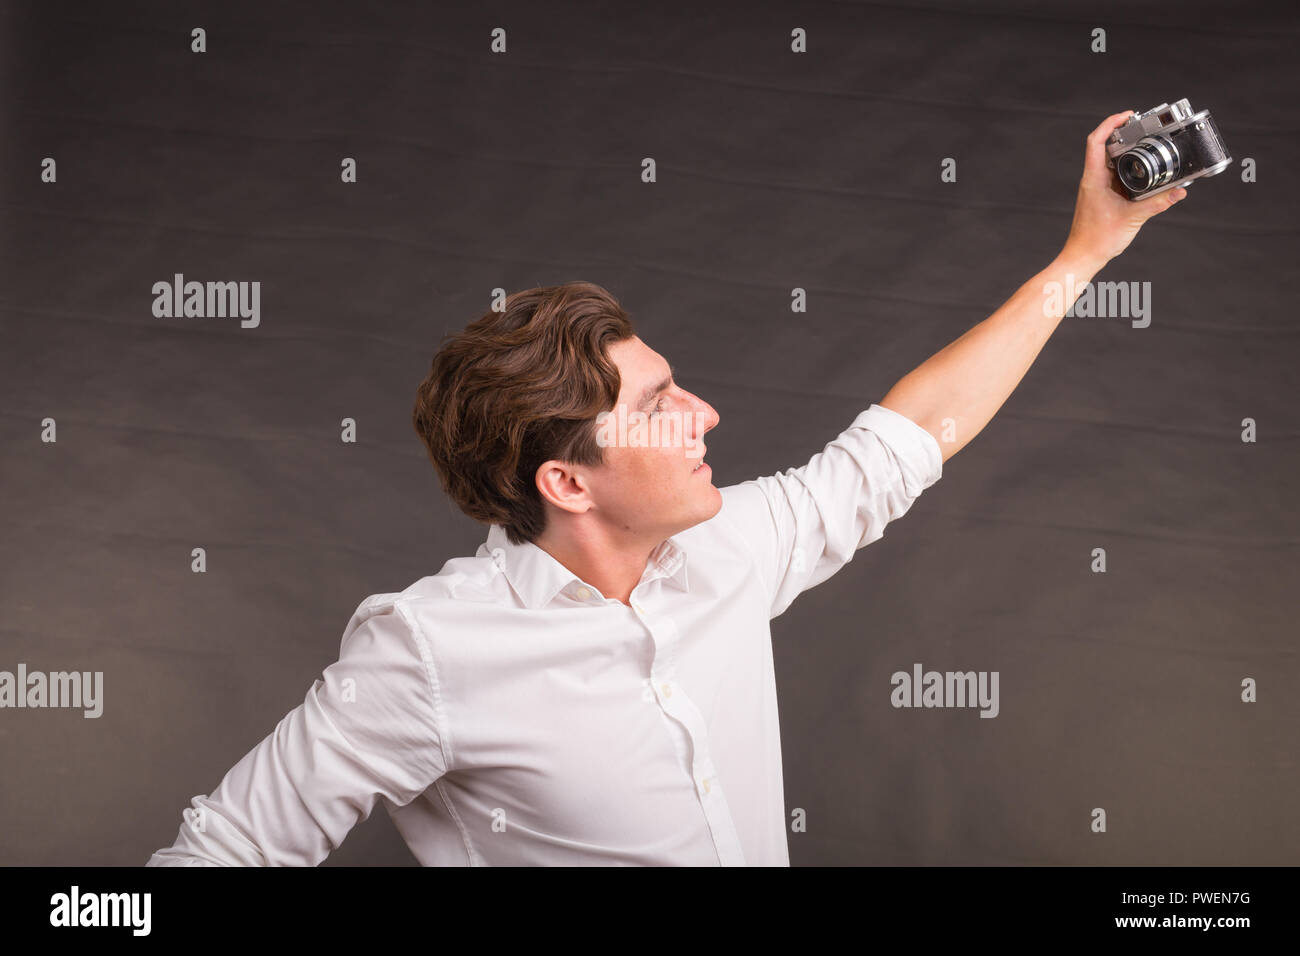 Technology, photogtaphy and people conecpt - Handsome man in white shirt taking a selfies Stock Photo